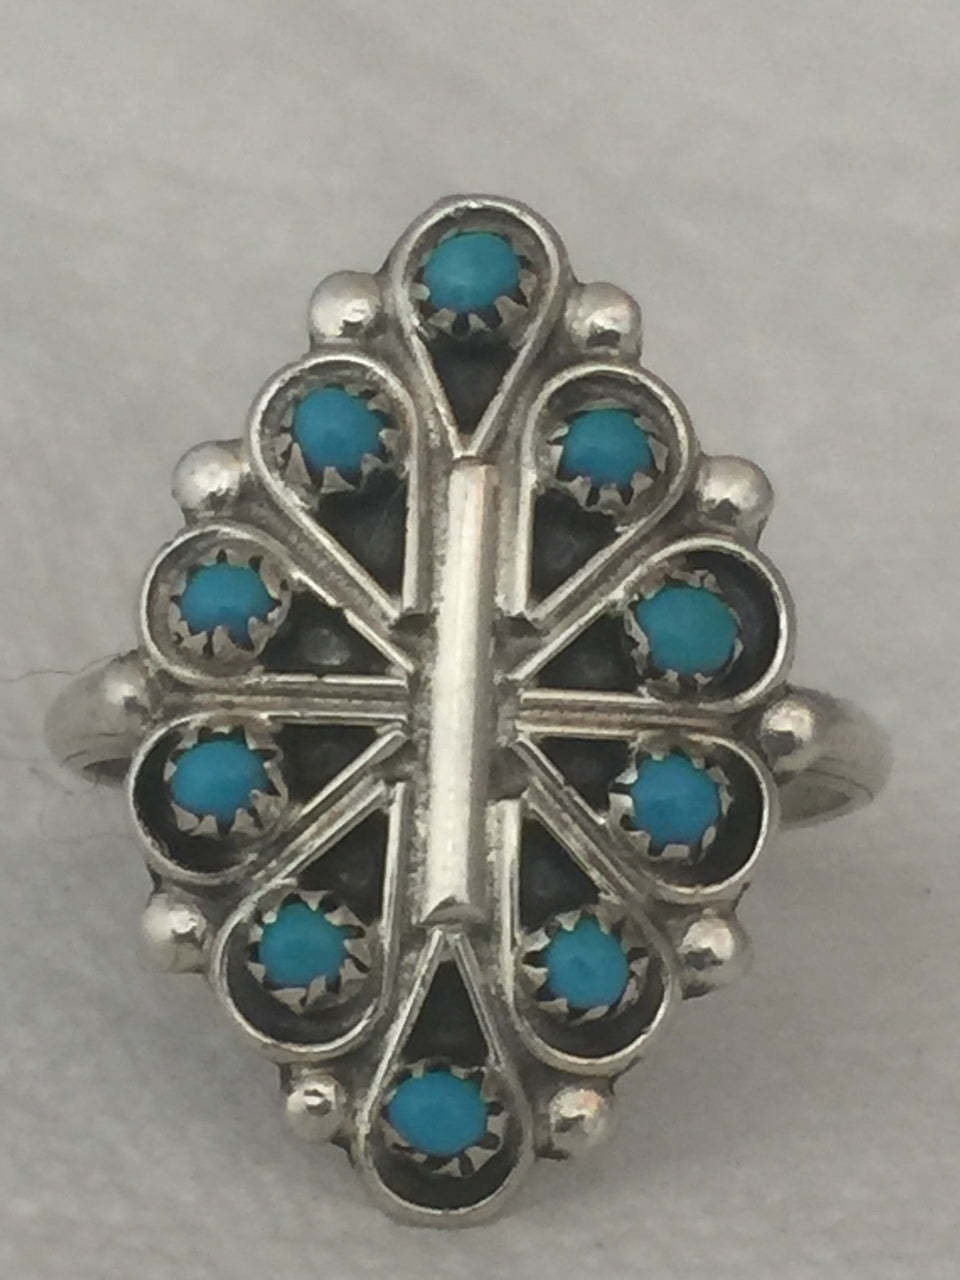 Zuni Turquoise Ring Vintage Sterling Silver Native American Size 7 